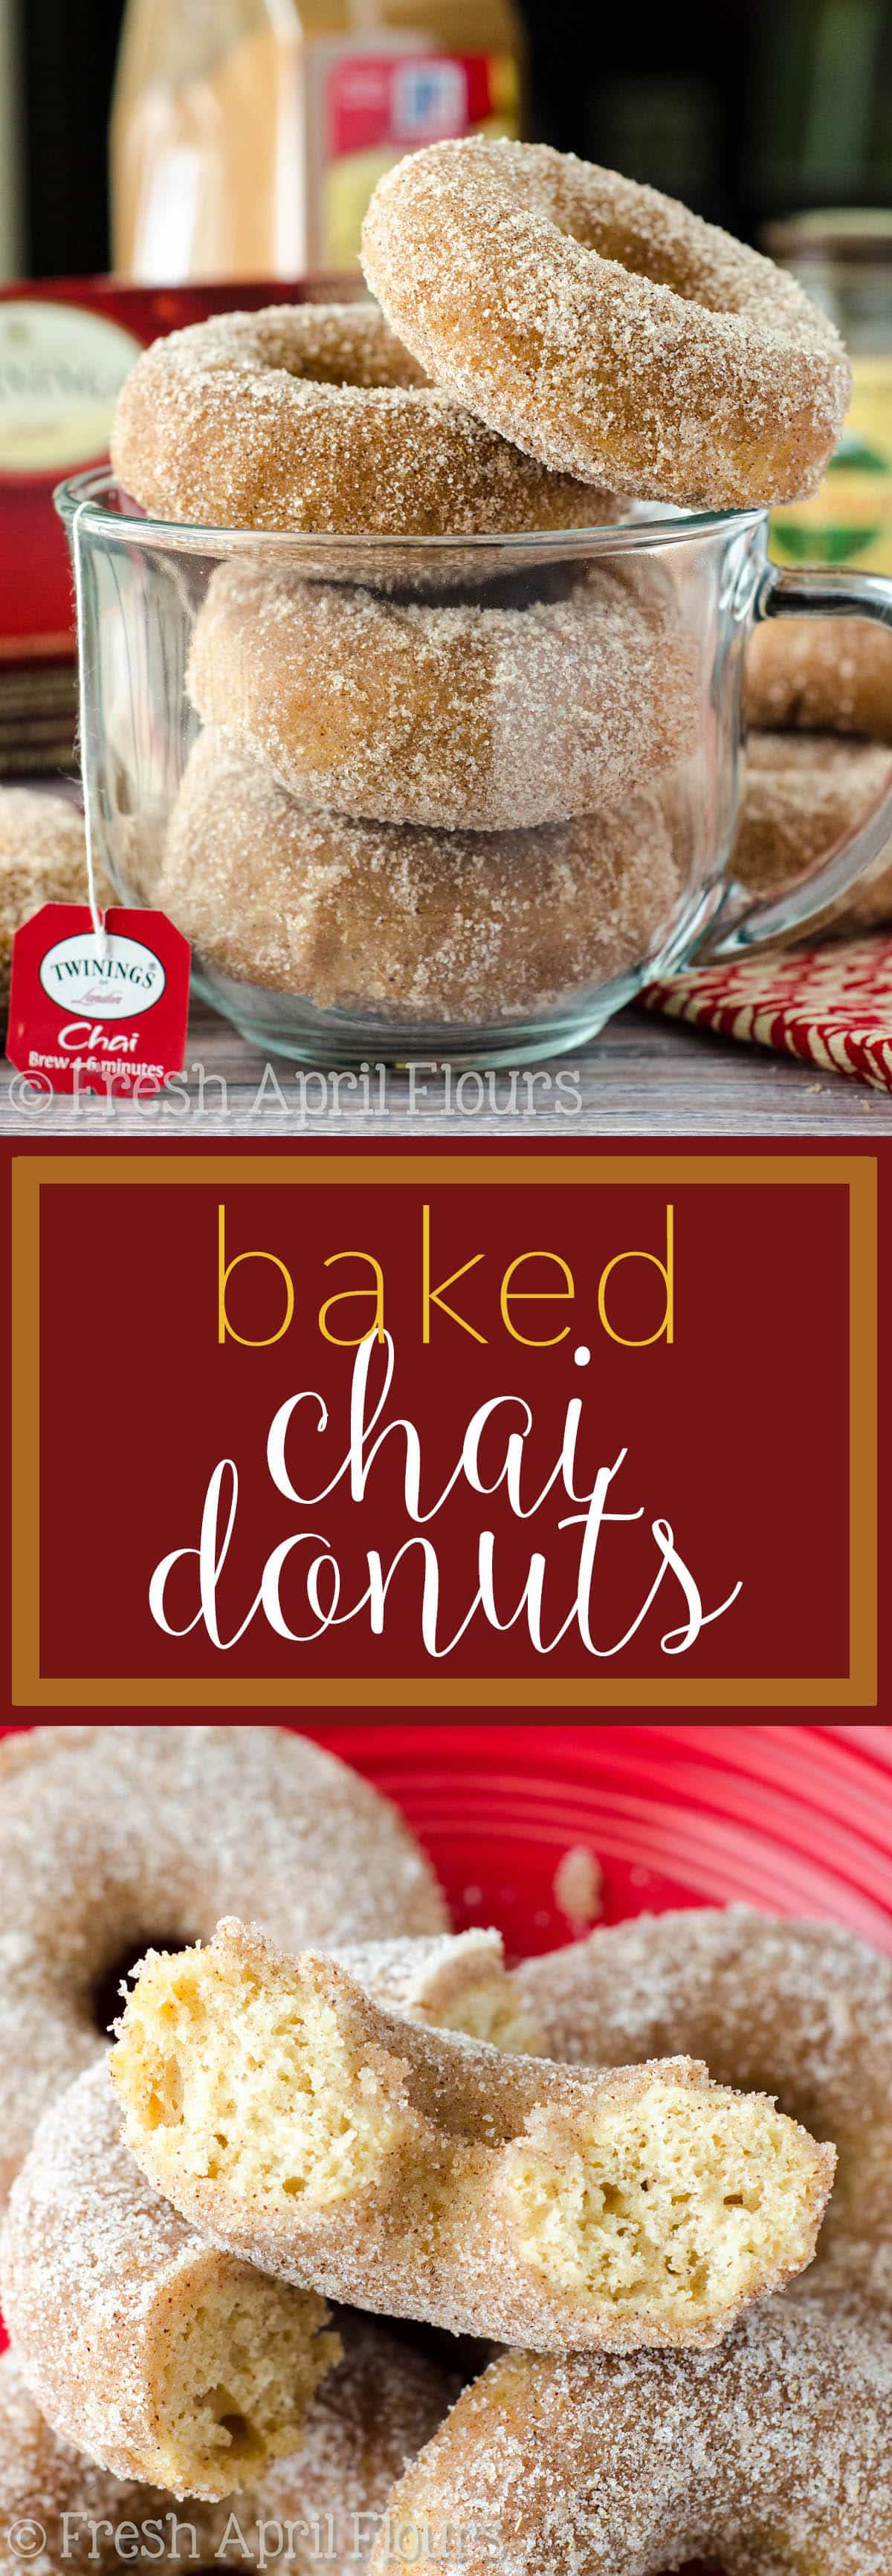 Baked Chai Donuts: Easy spiced donuts get a generous dunk in a spiced sugar coating for some extra pep in each bite. via @frshaprilflours